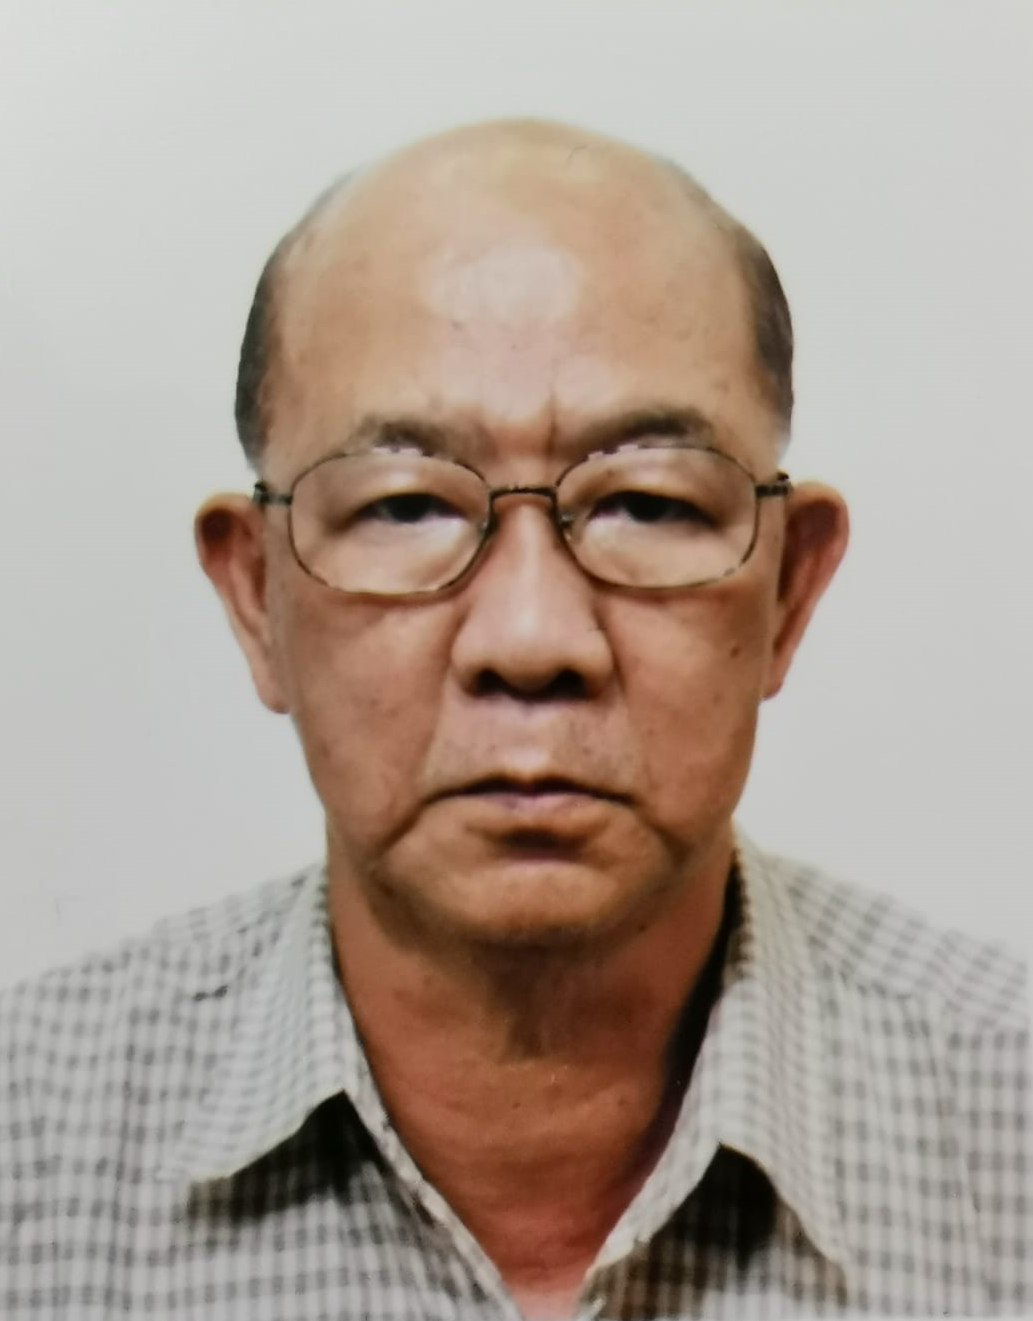 Chan Luen-for, aged 71, is about 1.8 metres tall, 61 kilograms in weight and of thin build. He has a round face with yellow complexion and is bald. He was last seen wearing a grey and blue checkered shirt, blue jeans, black shoes, a black bag and a pair of black glasses.